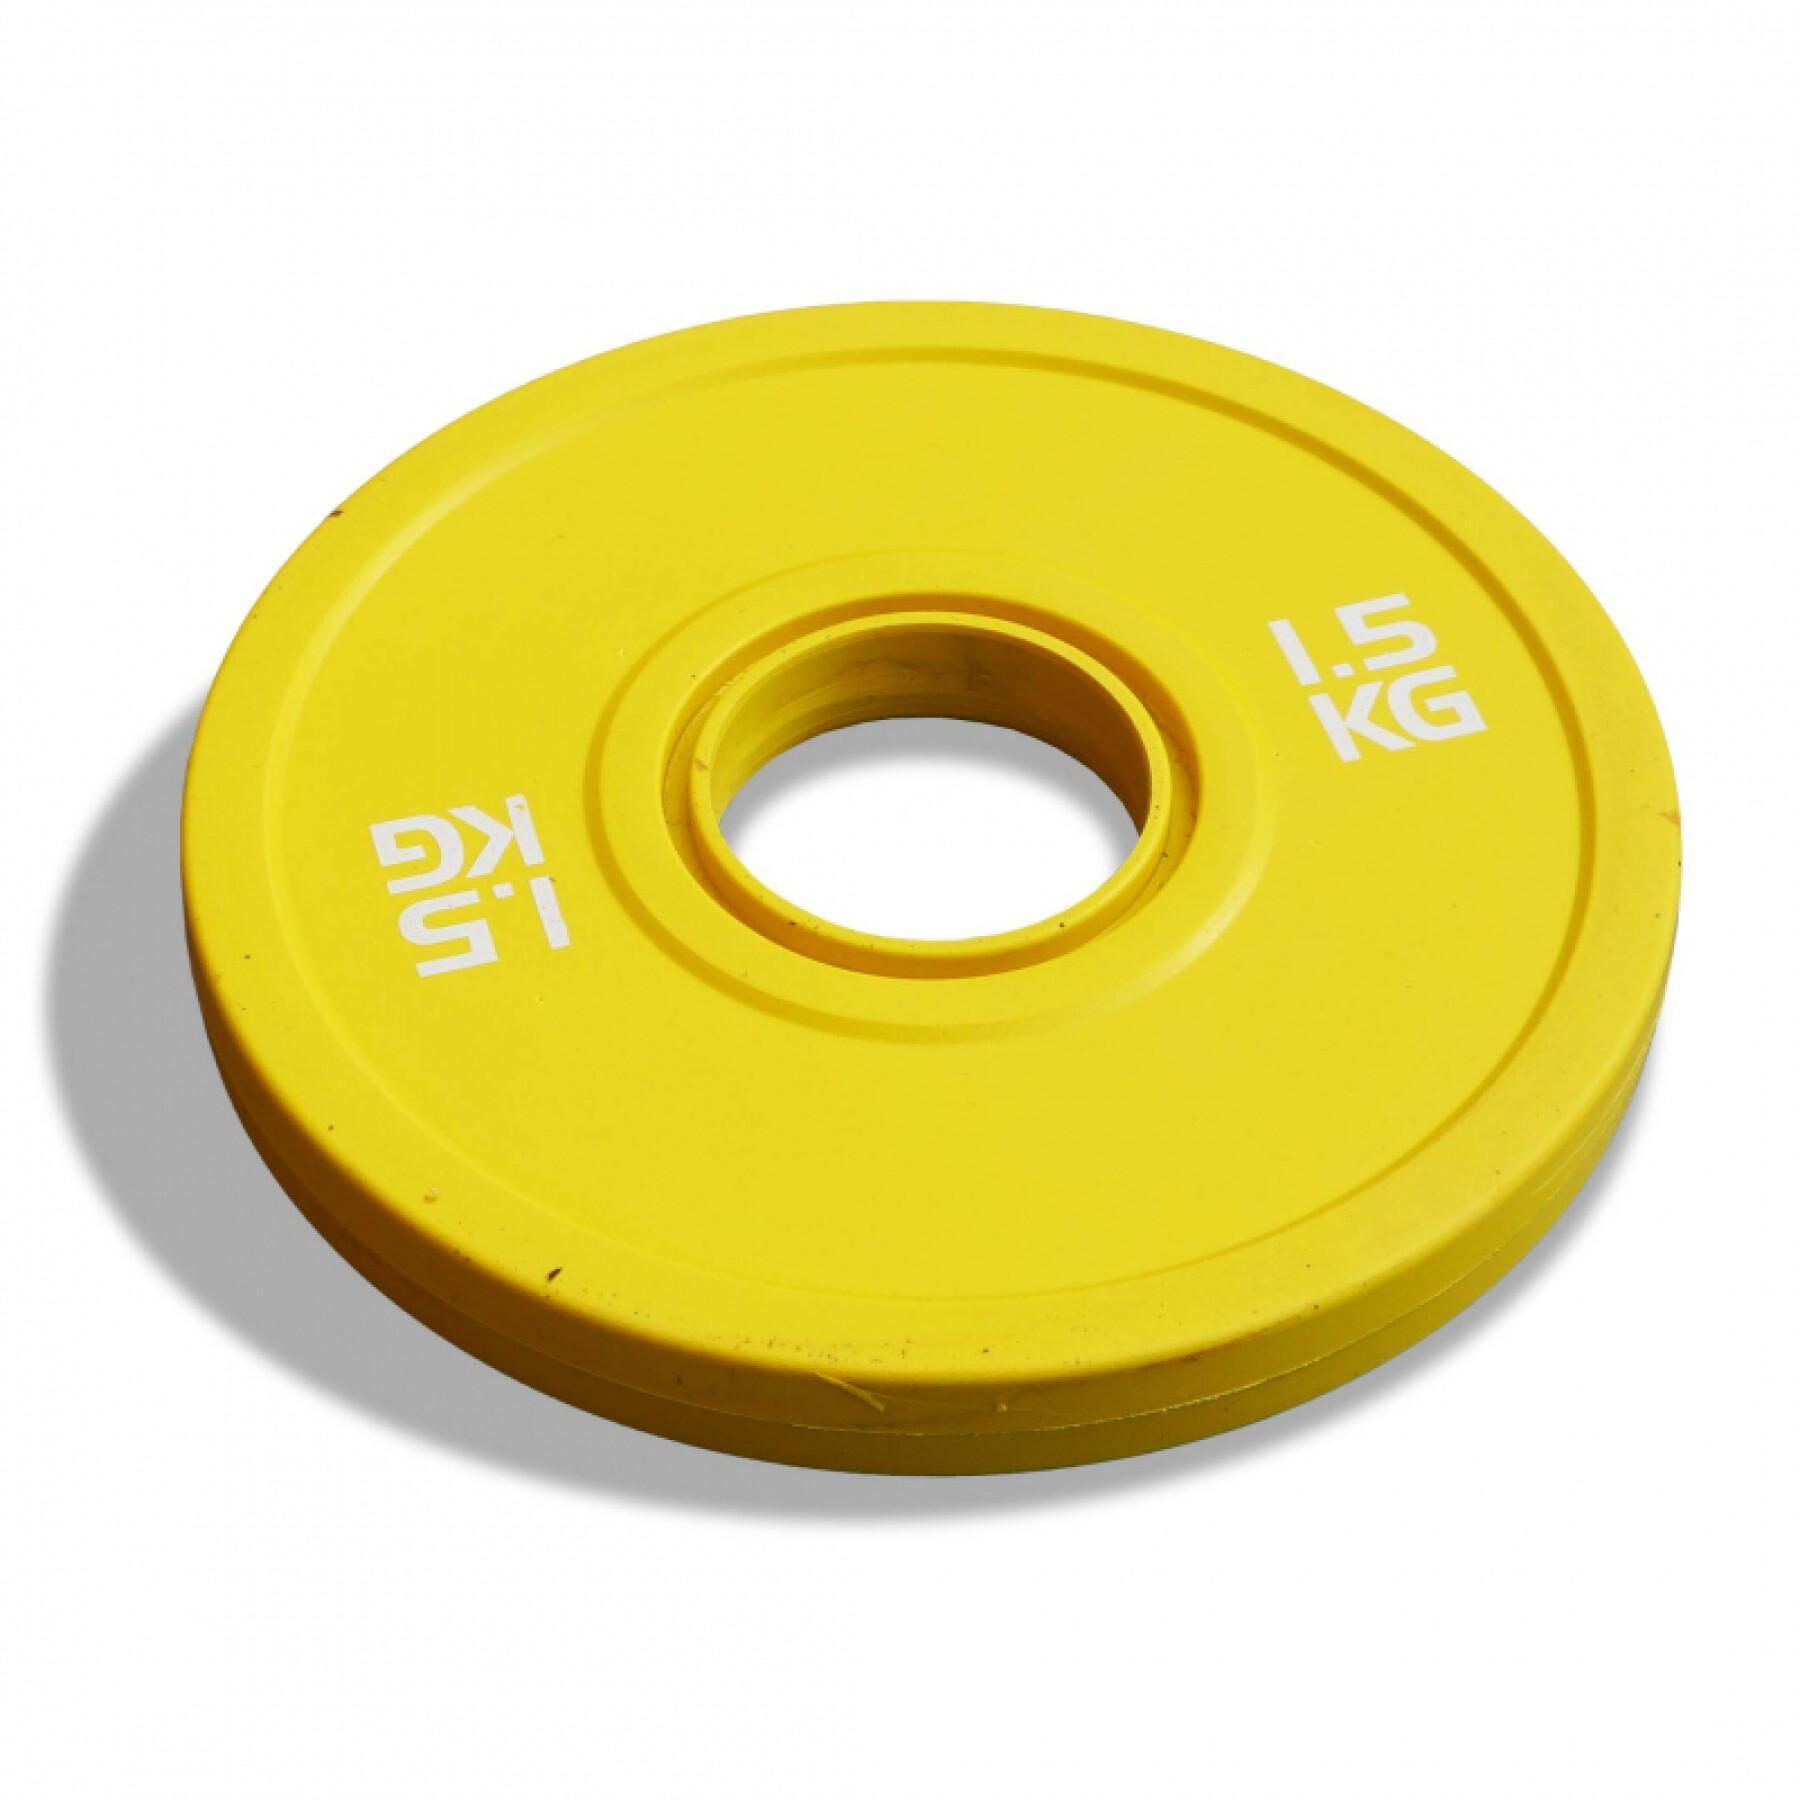 Additional weight disc Leader Fit